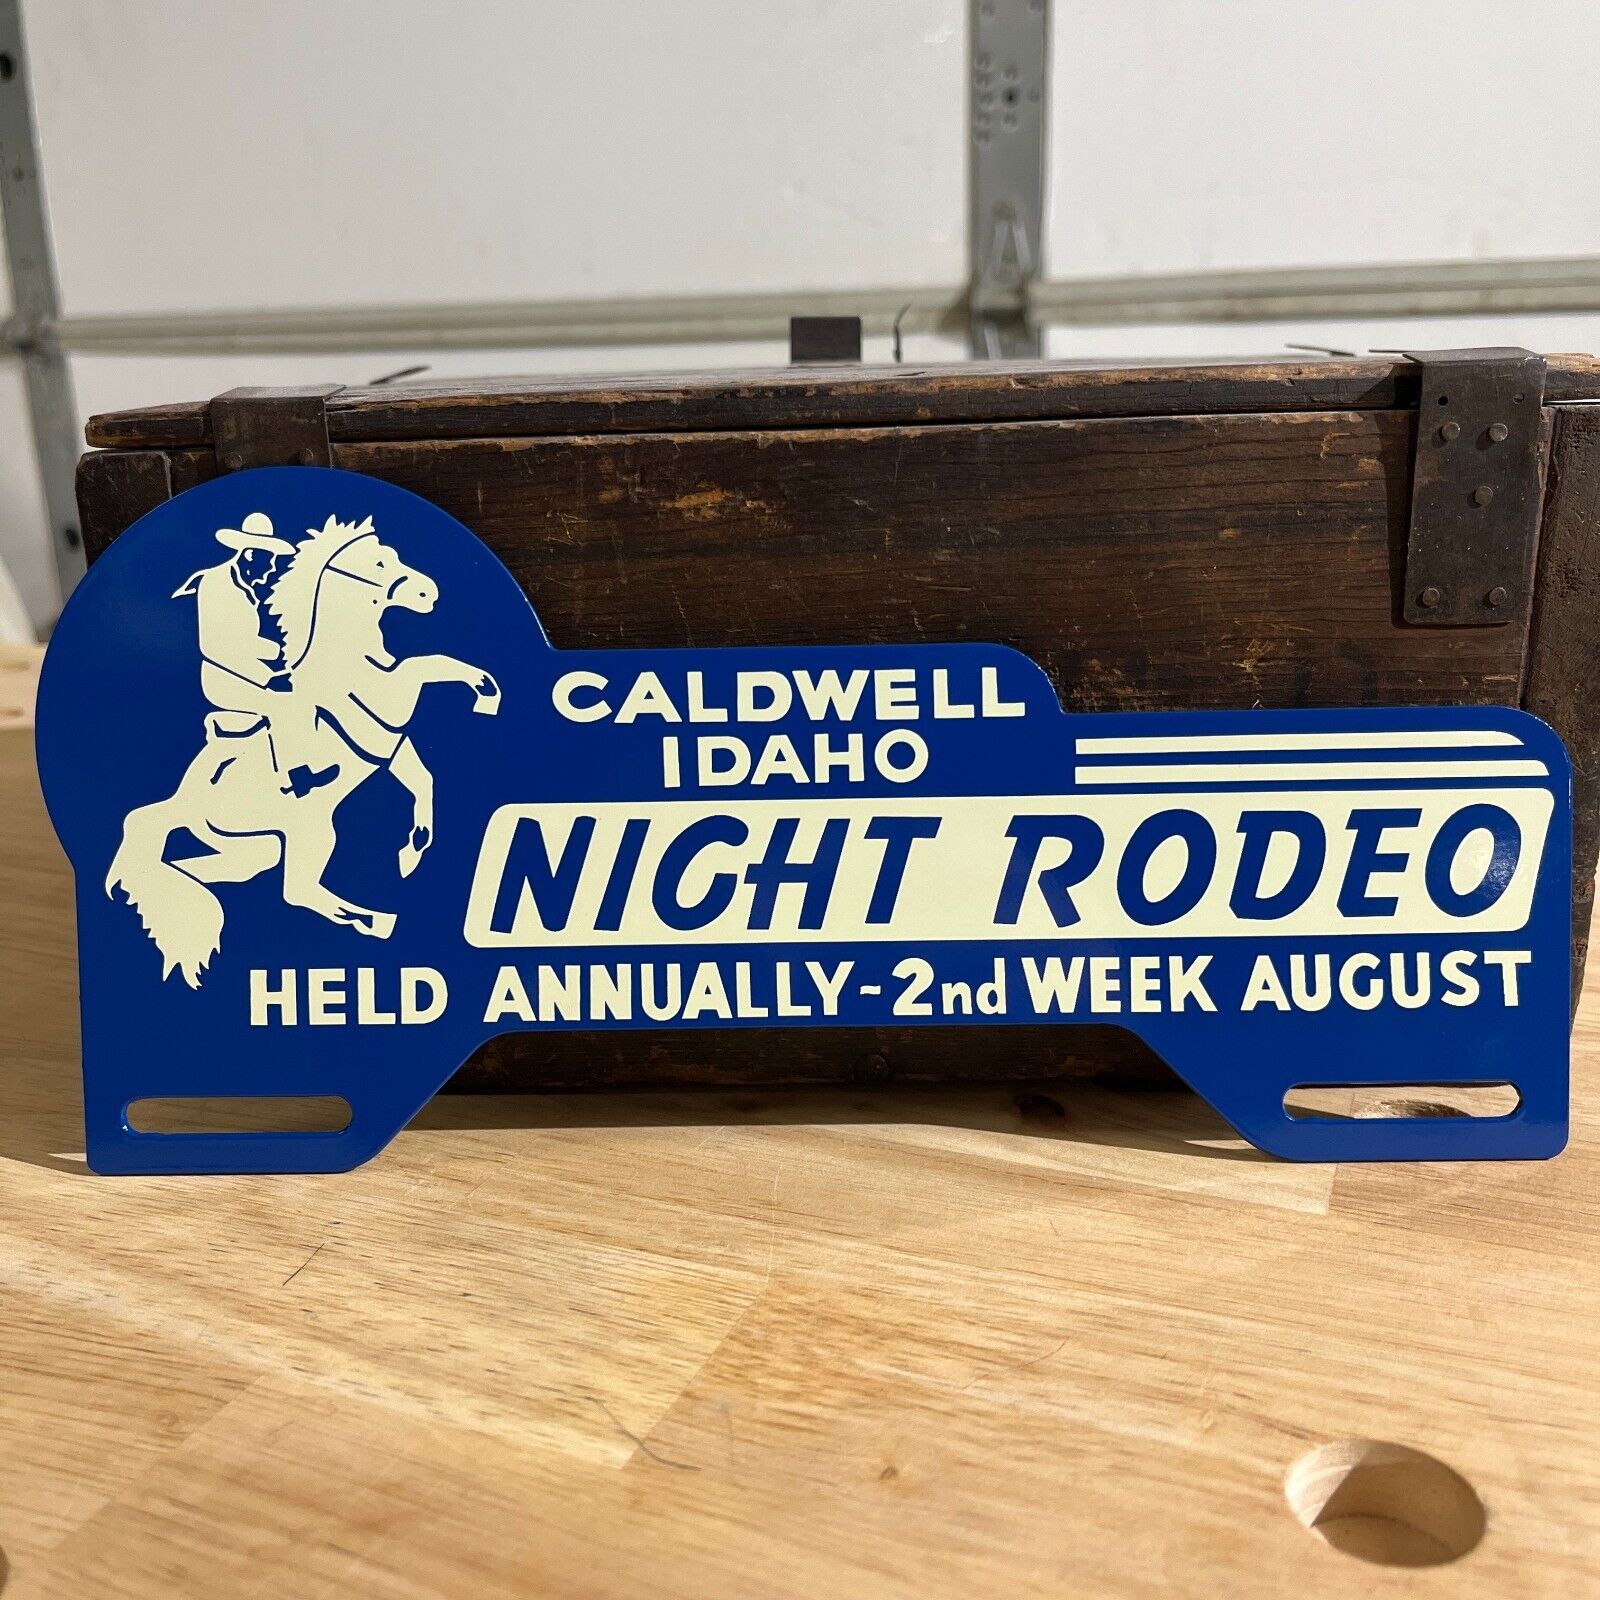 Caldwell Idaho Night Rodeo Metal License Plate Topper Sign Tag Topper